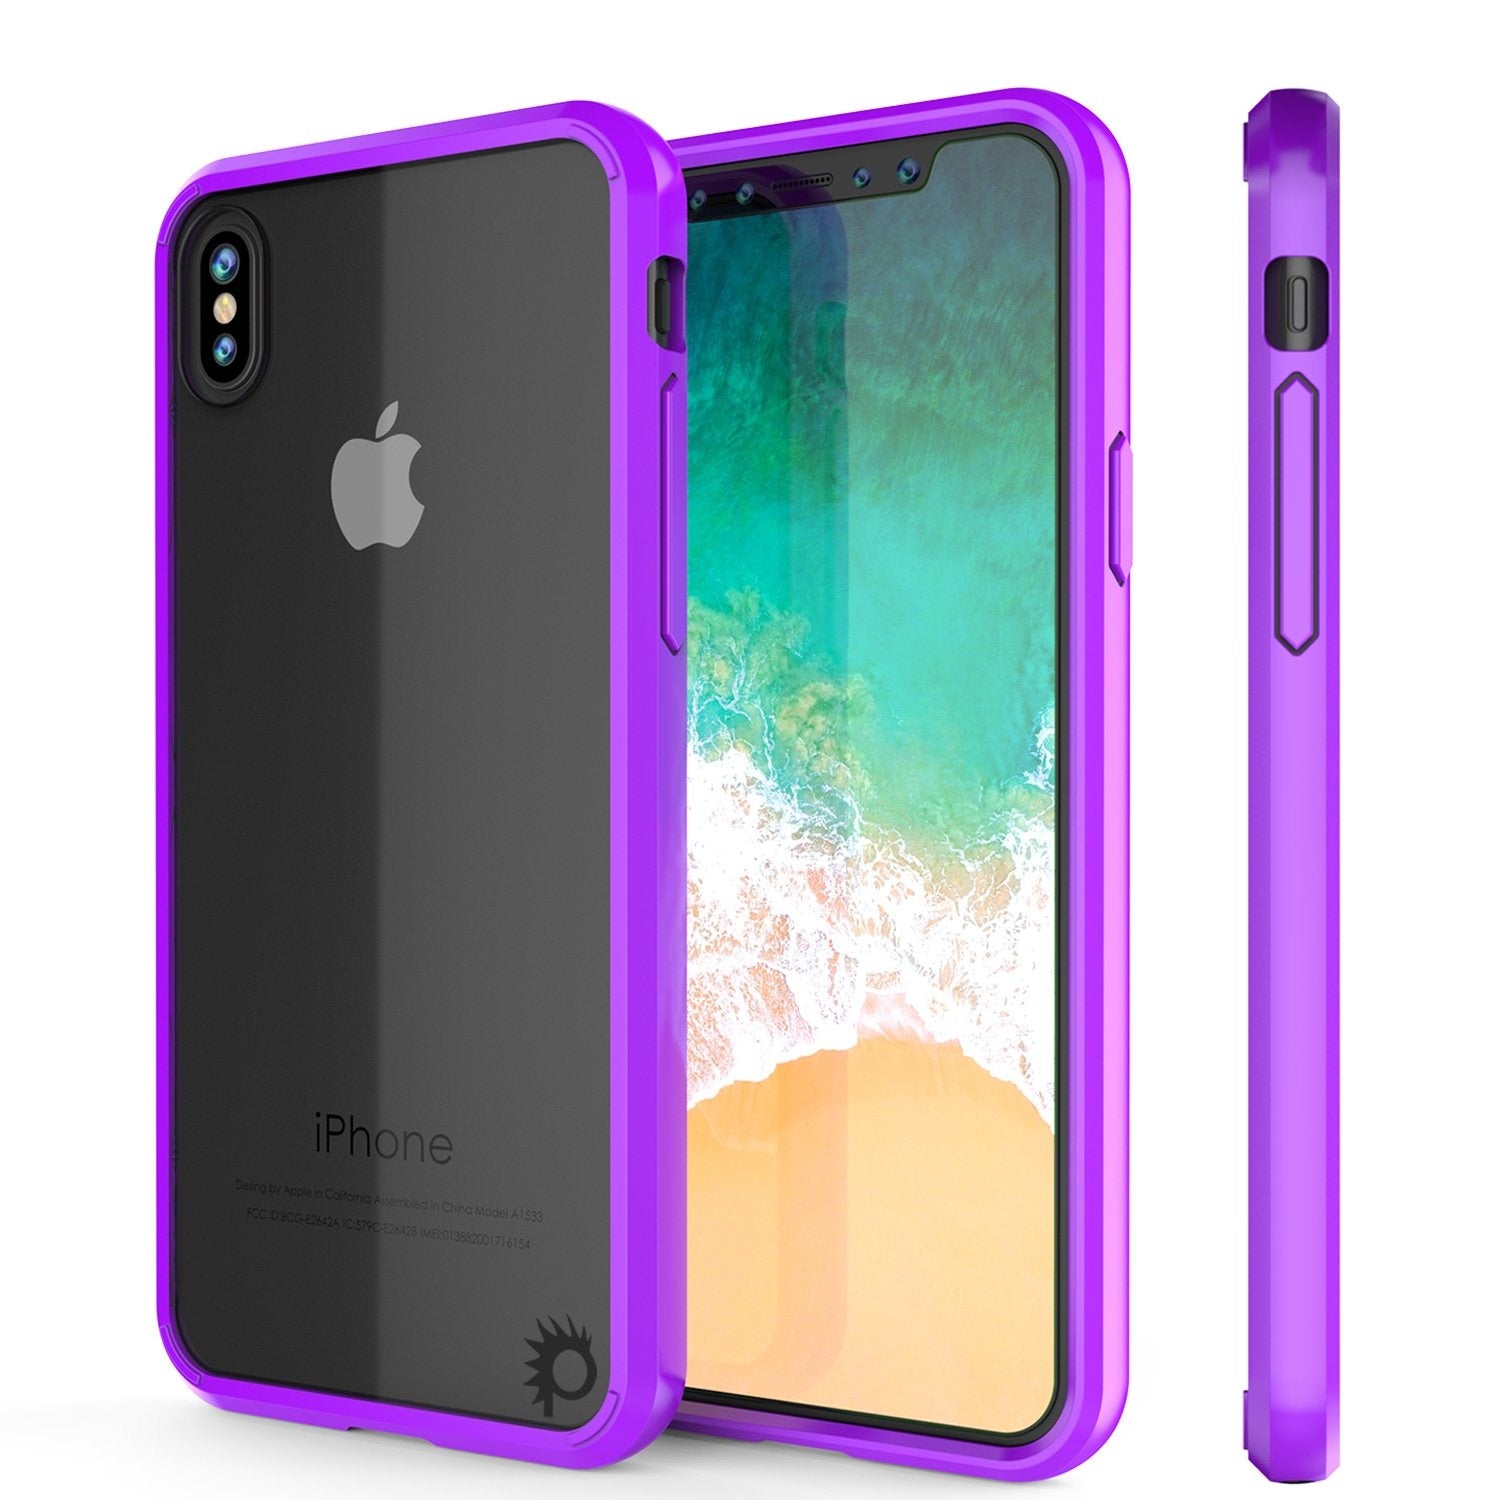 iPhone X Case, PUNKcase [LUCID 2.0 Series] [Slim Fit] Armor Cover W/Integrated Anti-Shock System [Purple]